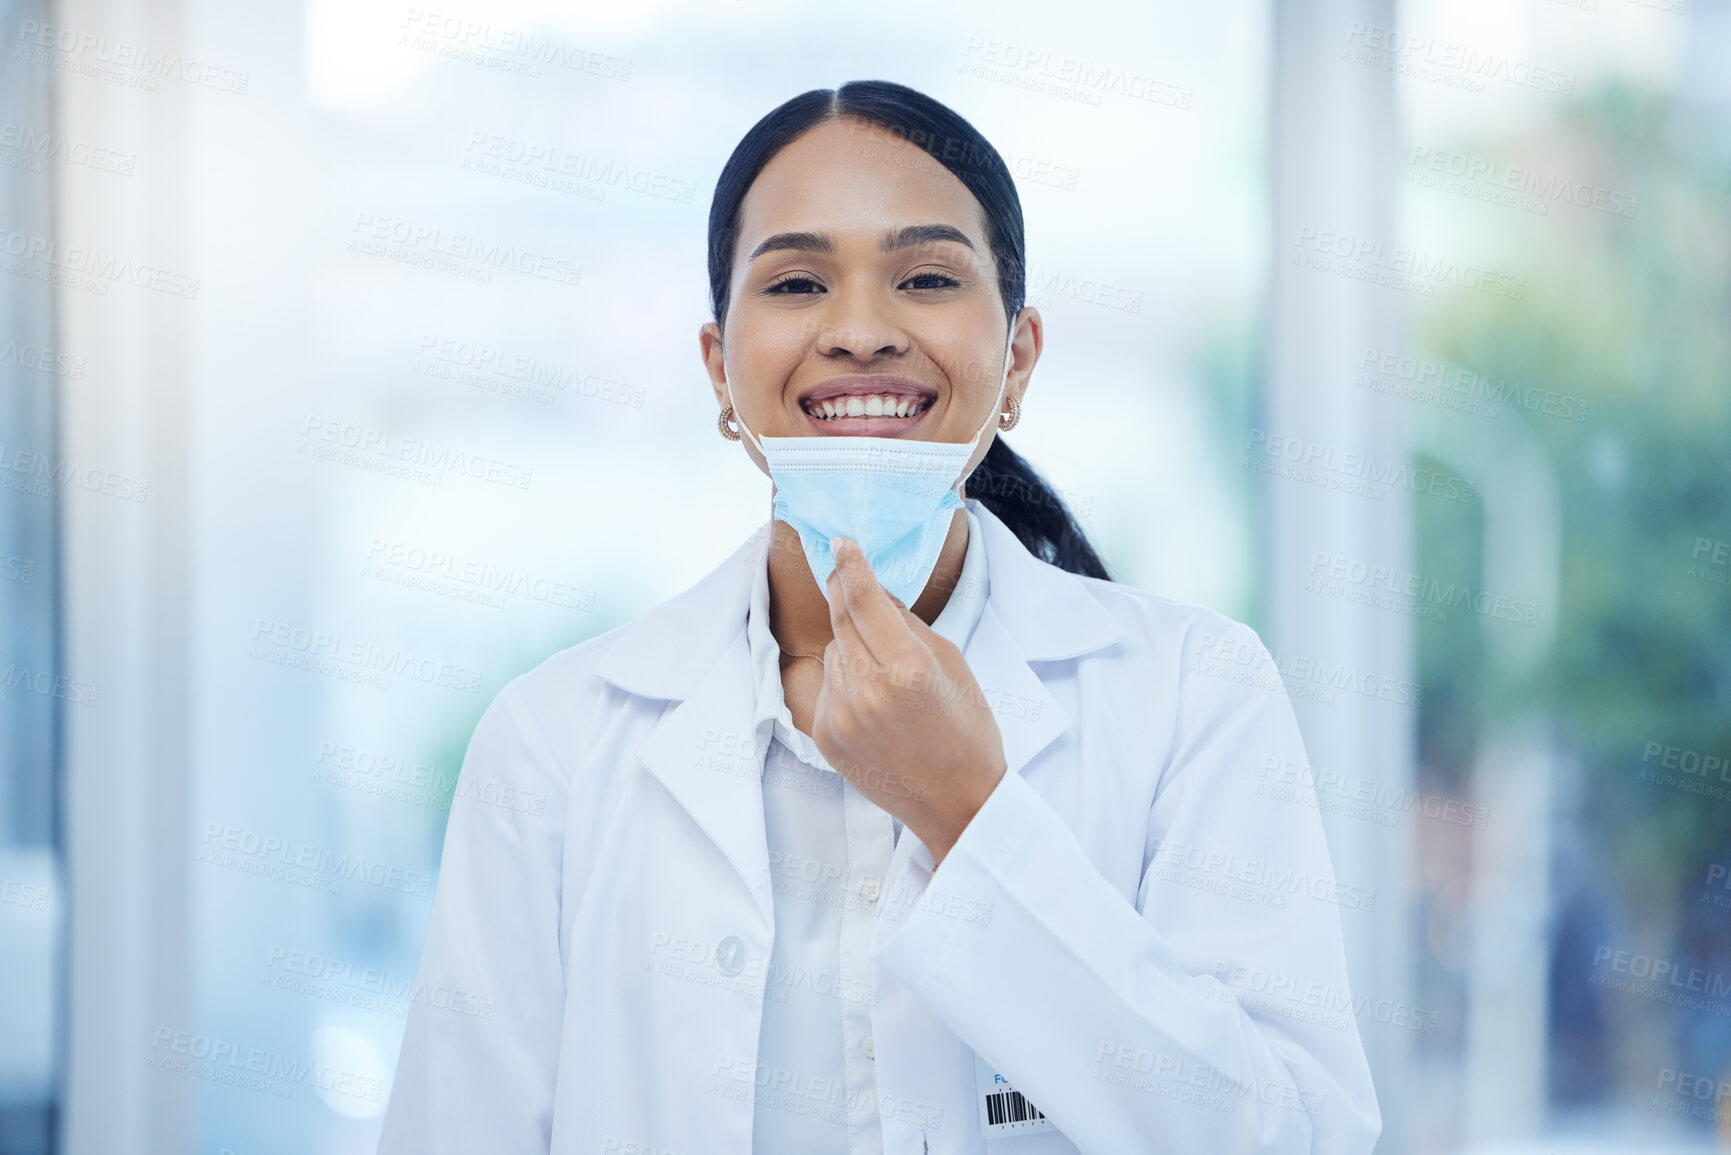 Buy stock photo Covid, healthcare and happy portrait of doctor woman in professional Mexico clinic with smile. Optimistic medical expert remove face mask protection at end of coronavirus health pandemic.

